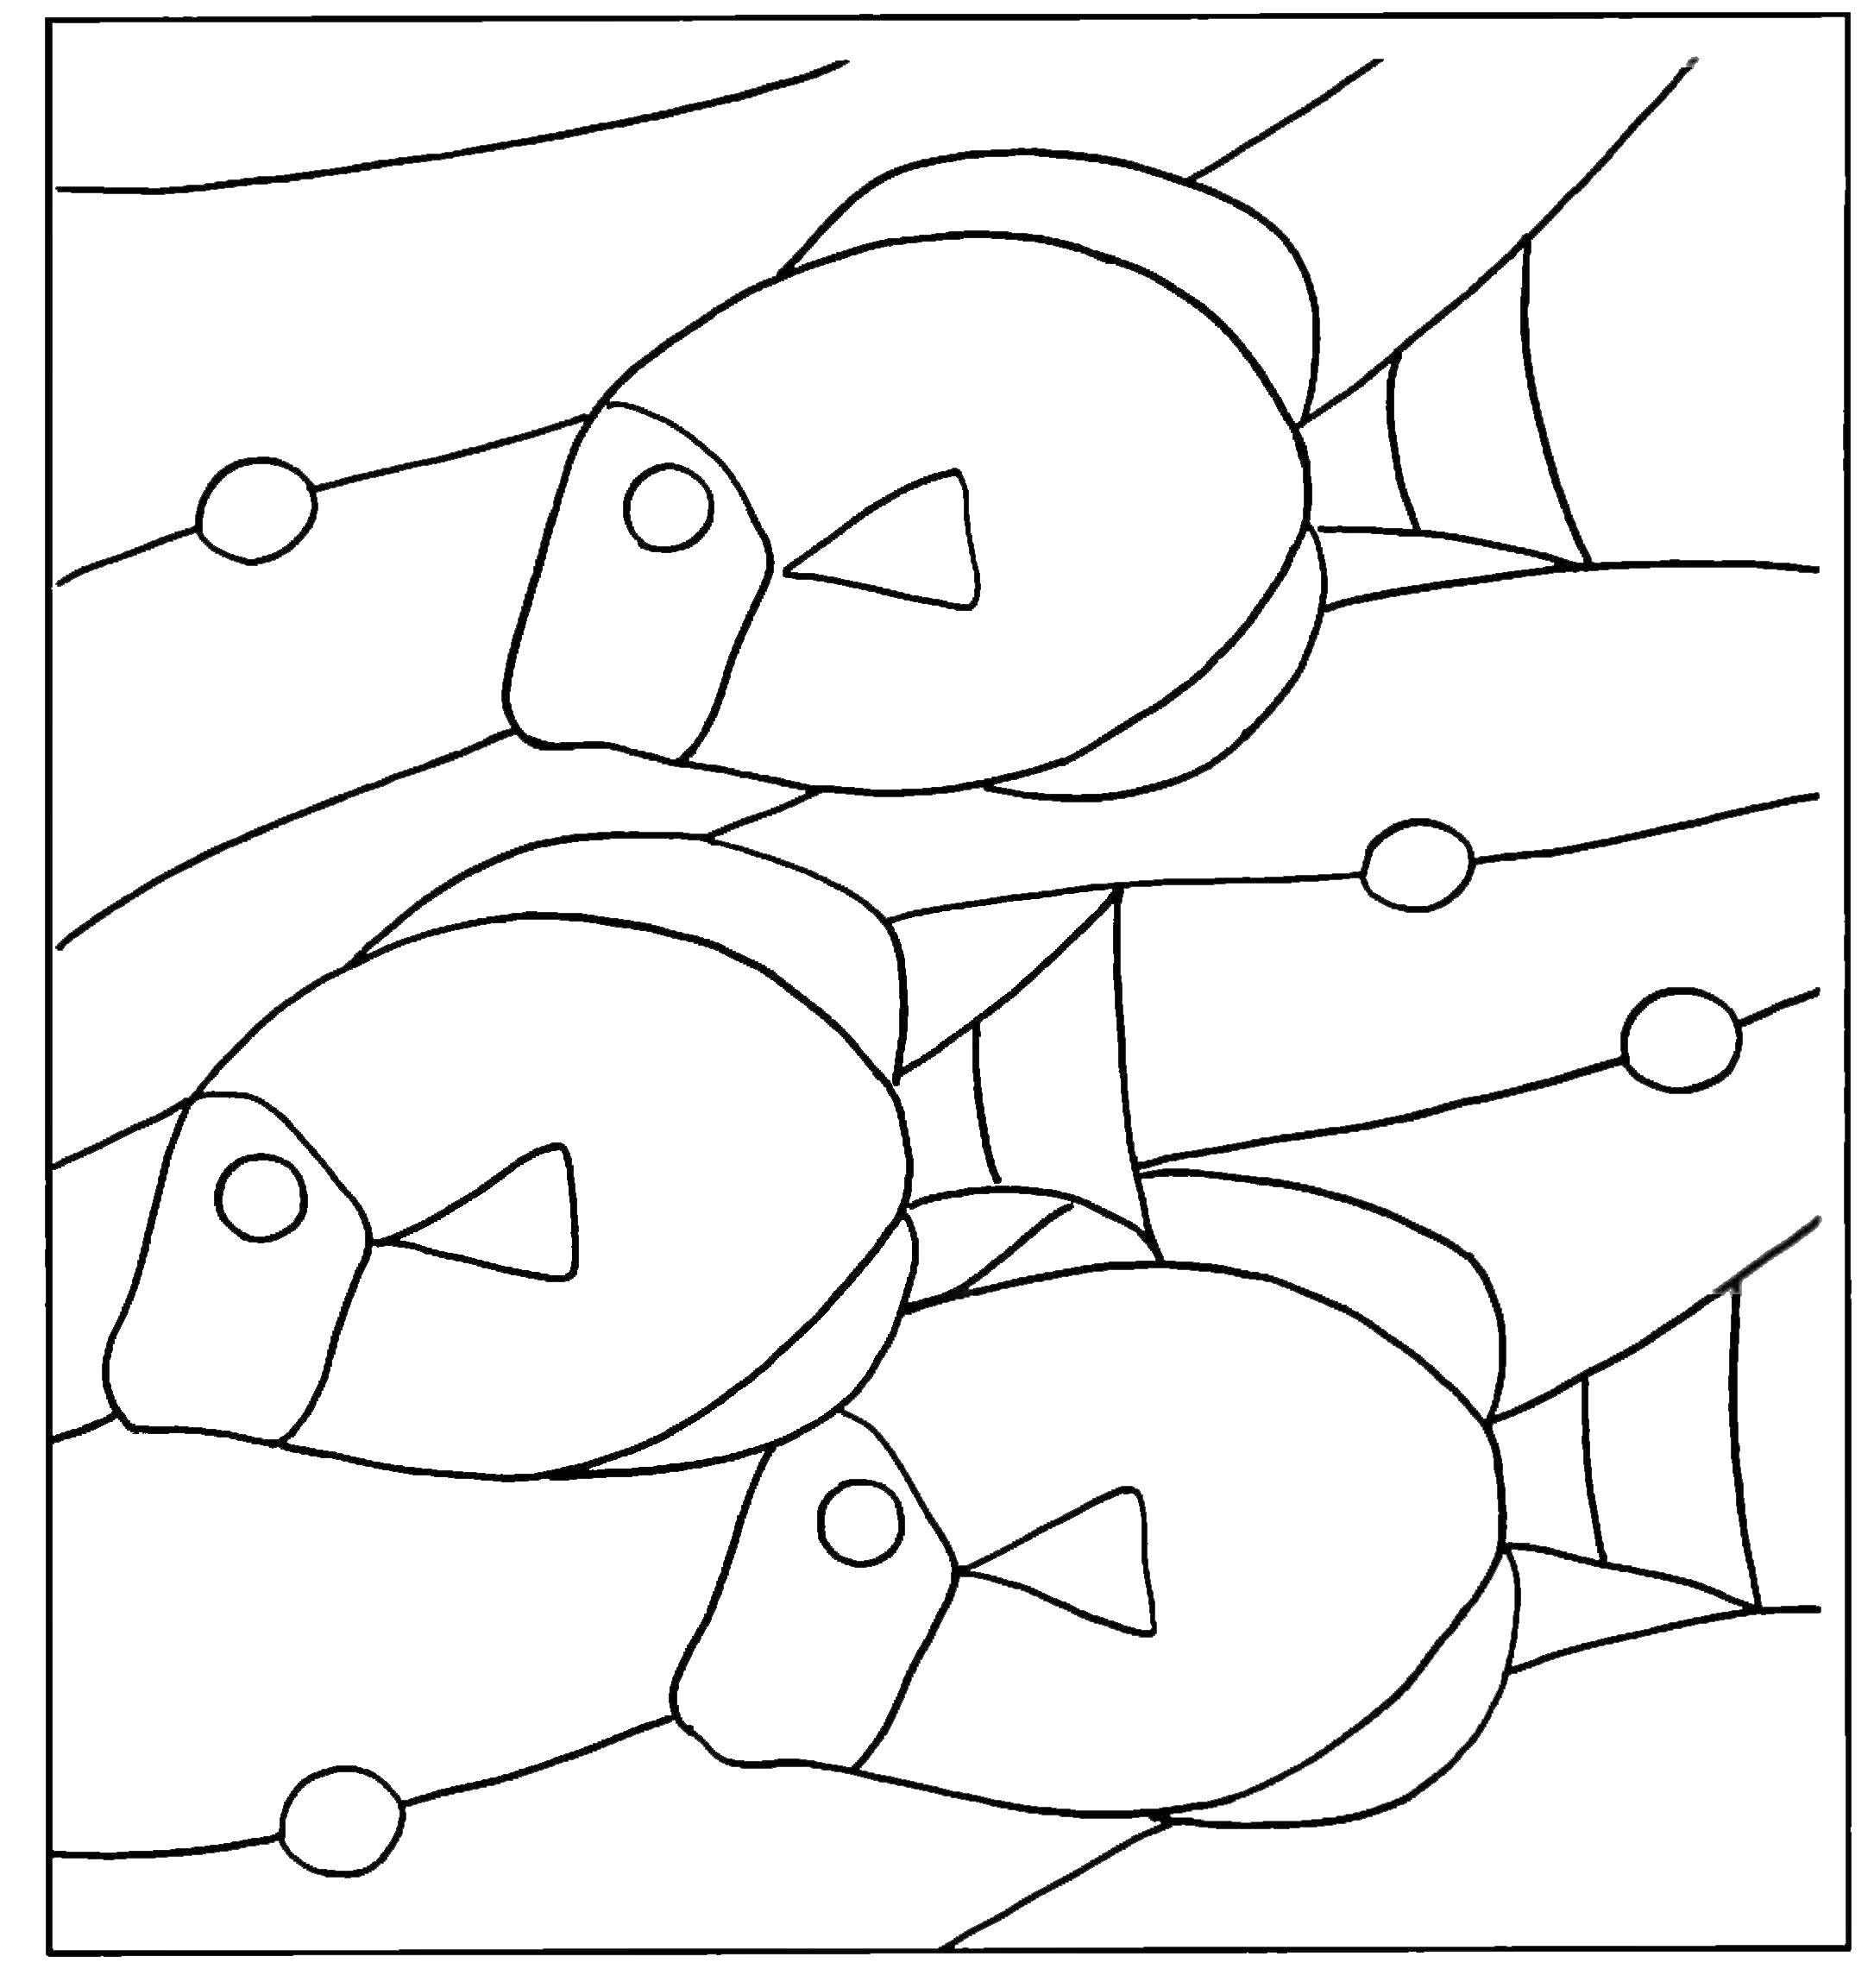 Coloring Stained glass. Category for stained glass. Tags:  Stained glass, pattern.